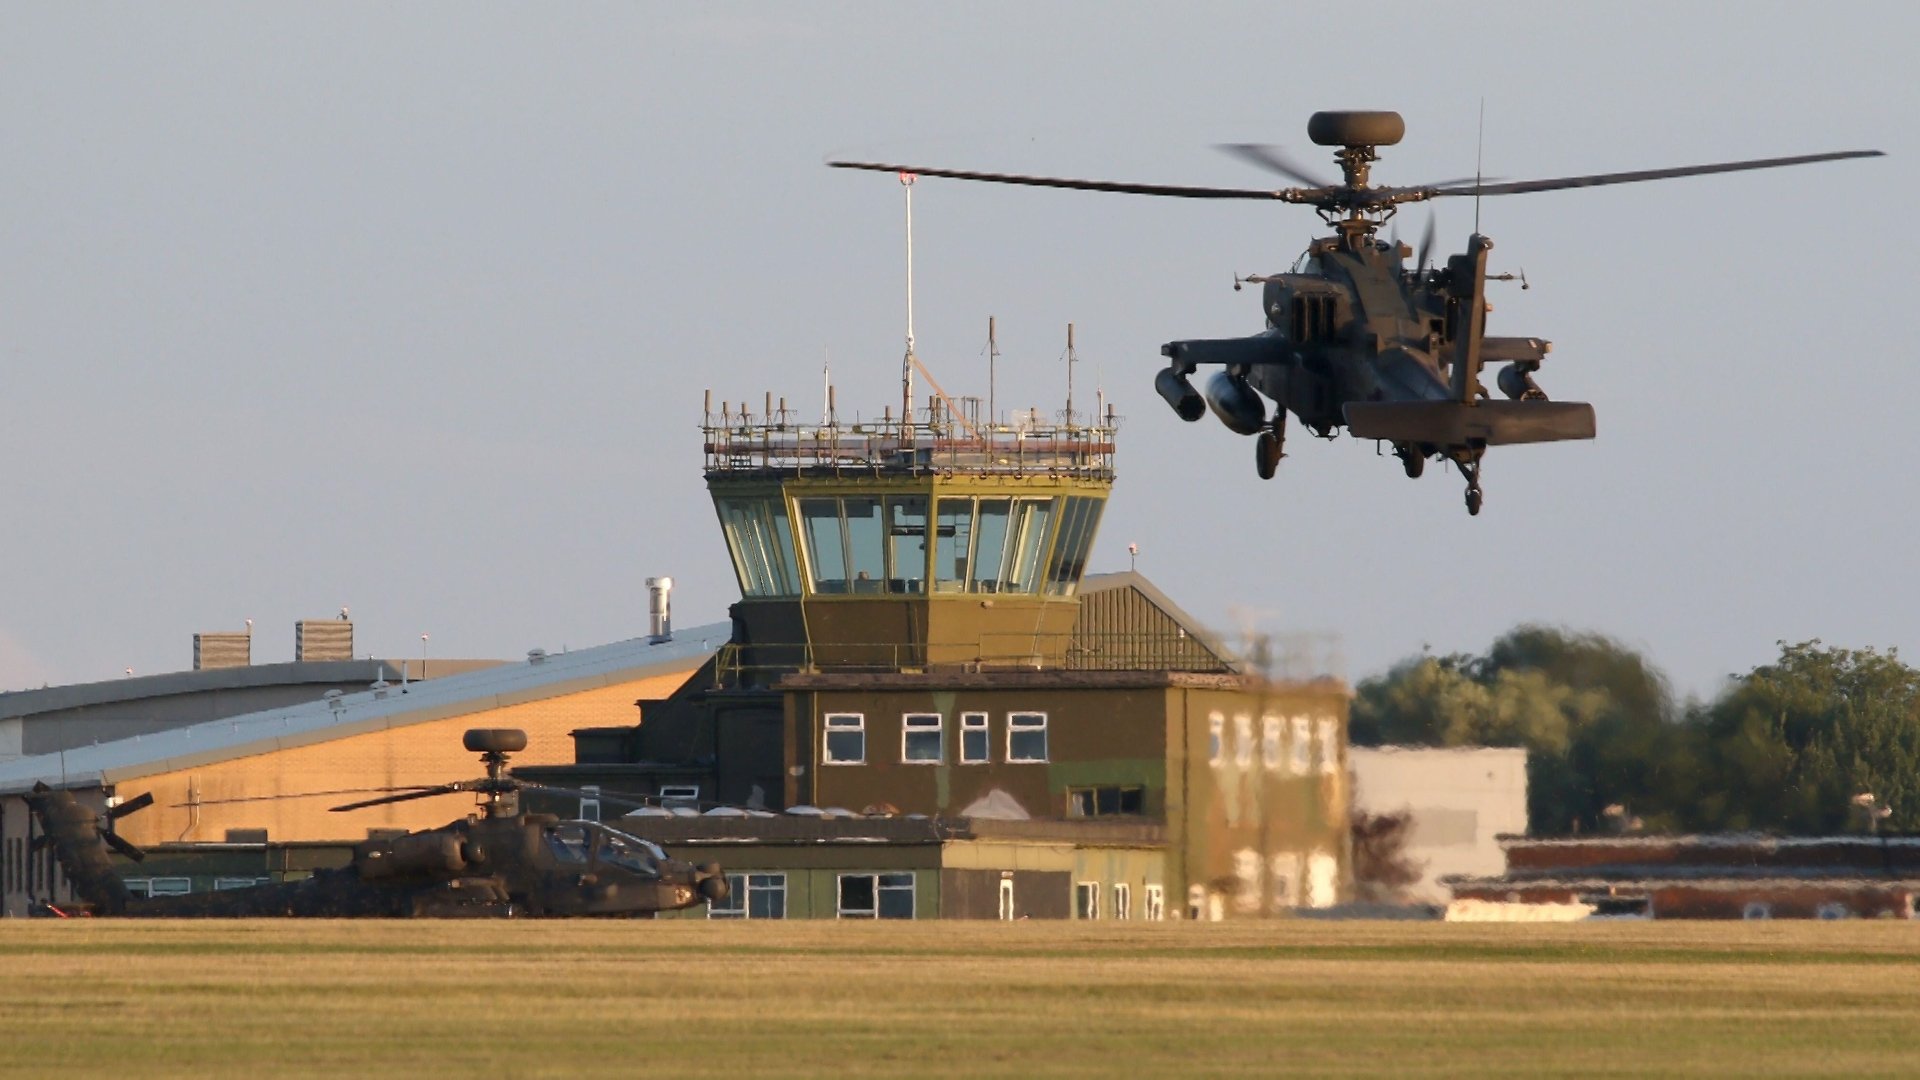 Army Air Corps Apache attack helicopter at Wattisham Airfield Suffolk 020720 CREDIT ALAMY STOCK PHOTO.jpeg